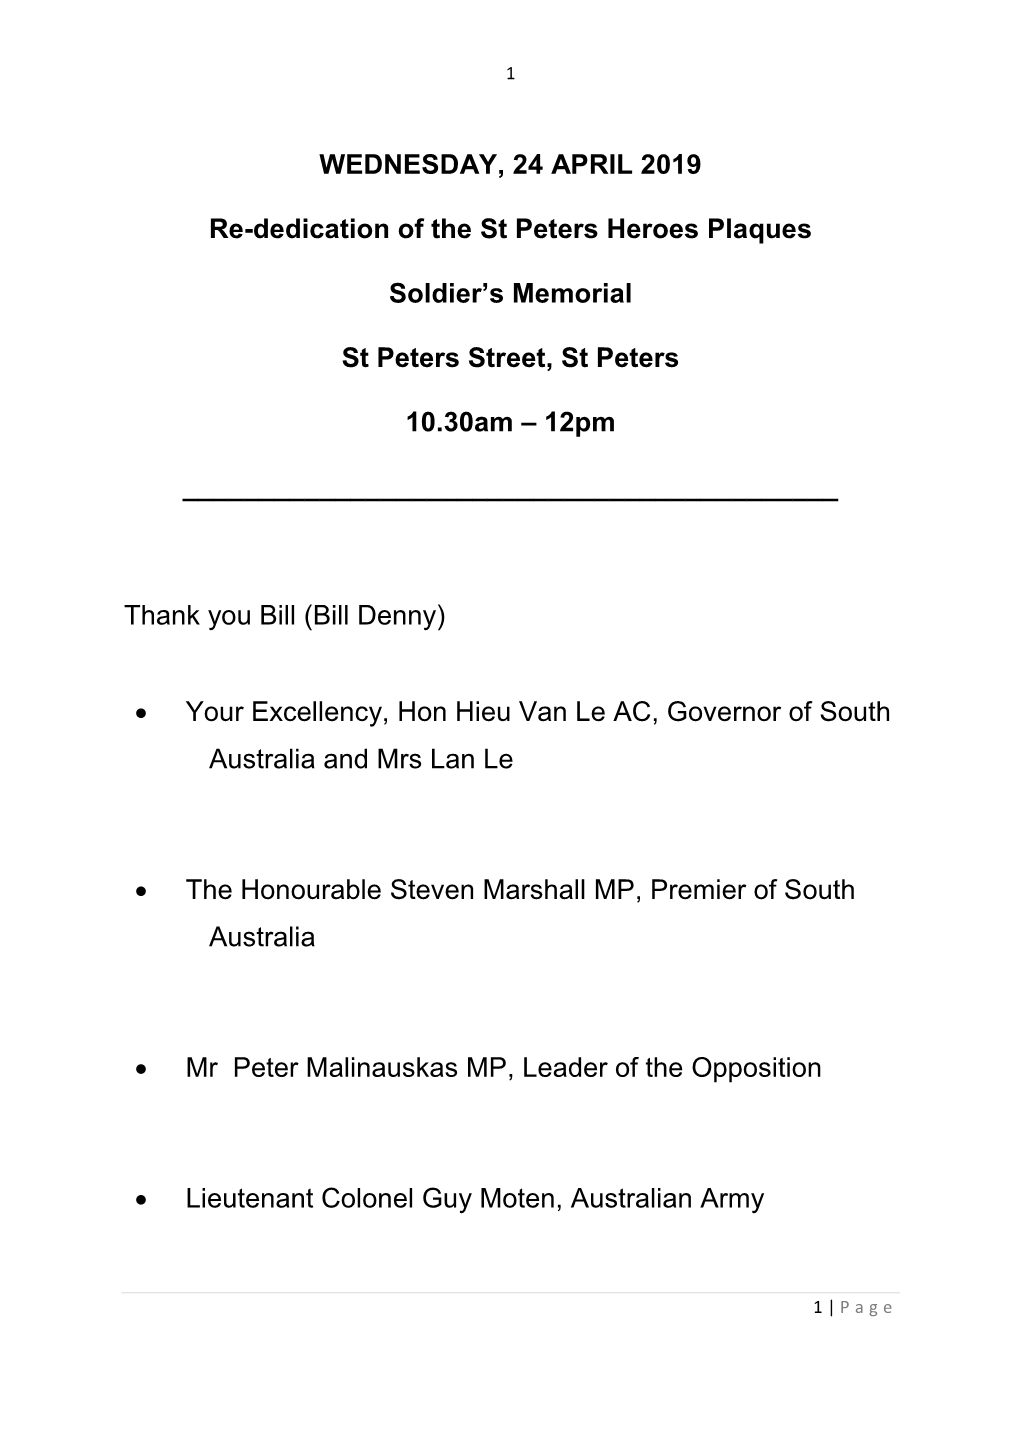 Re-Dedication of the St Peters Heroes Plaques